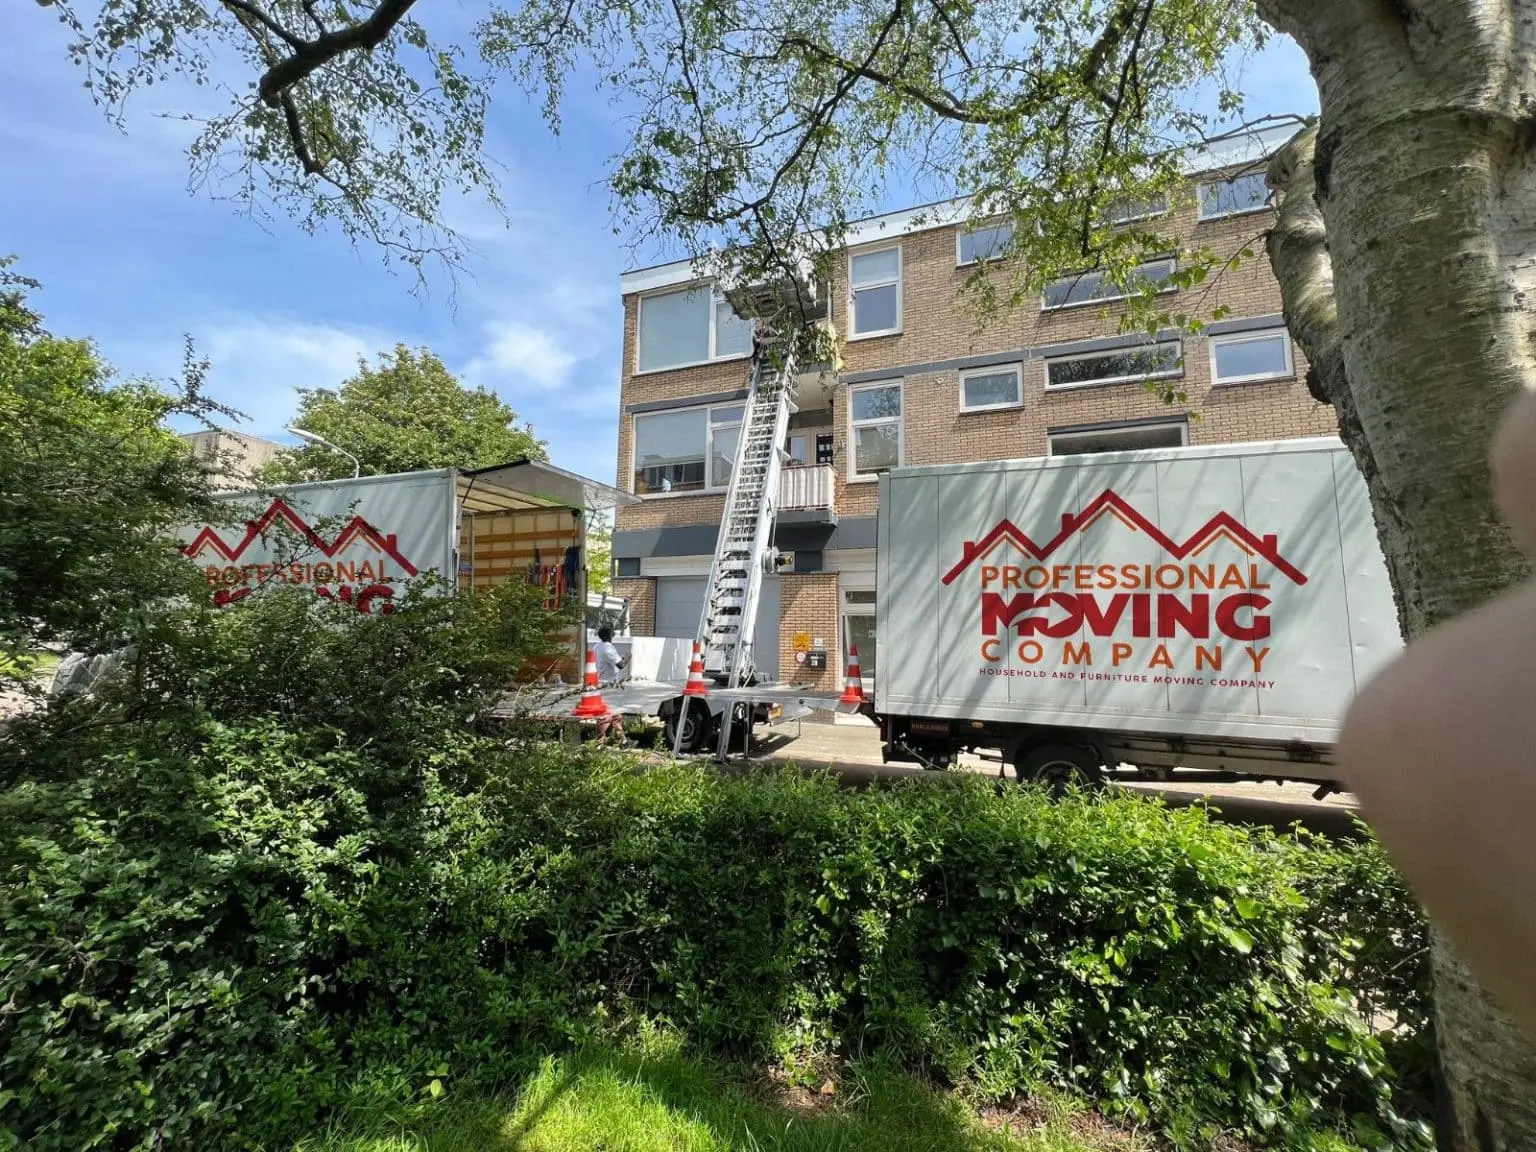 Discover Our Coverage: Cities We Serve Across the Netherlands | Comprehensive Moving Services in Kaag en Braassem